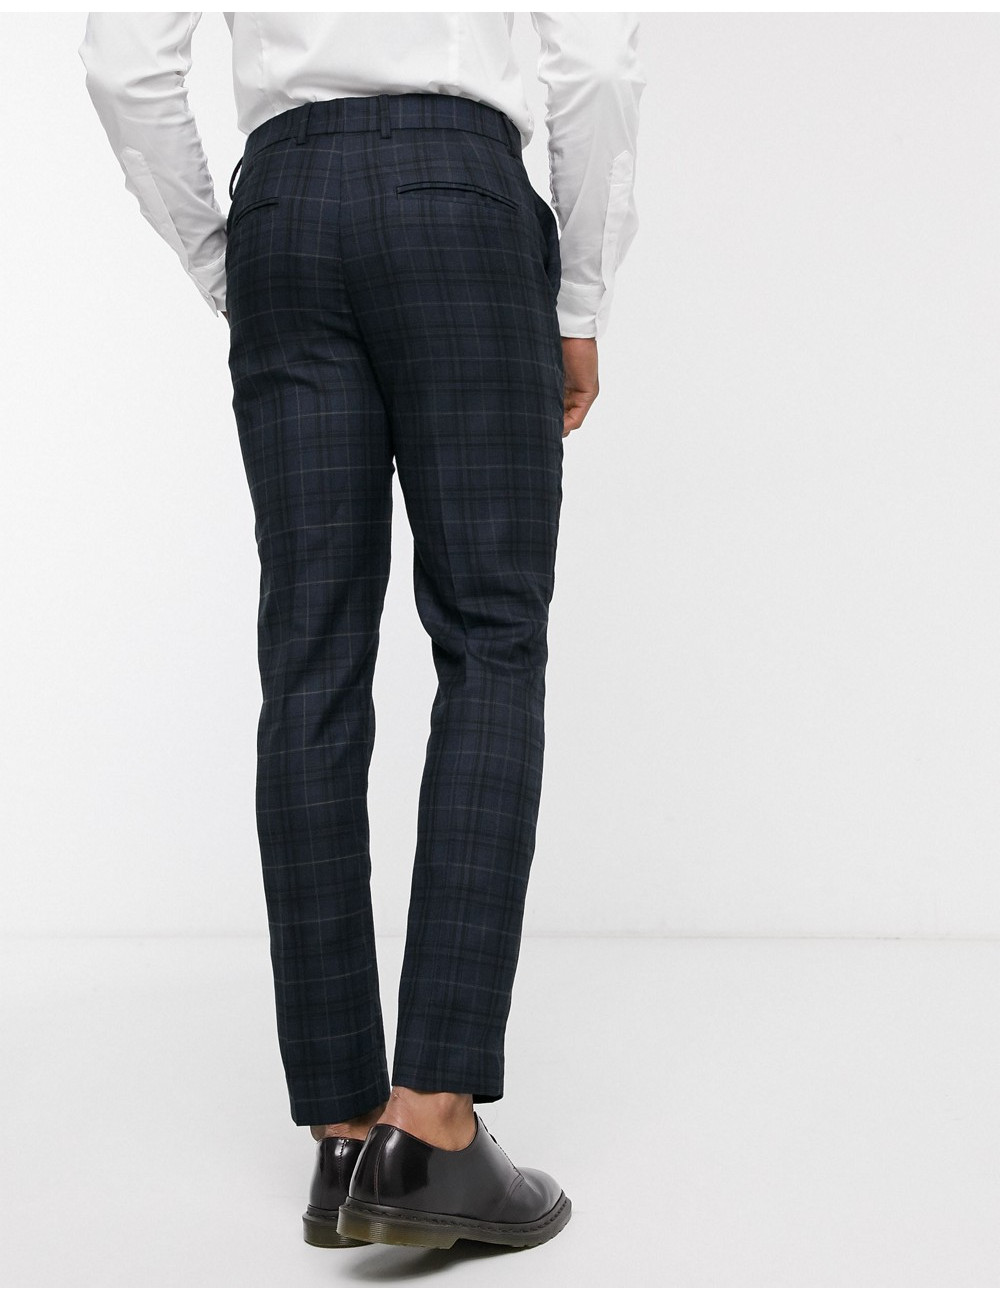 New Look check suit trouser...